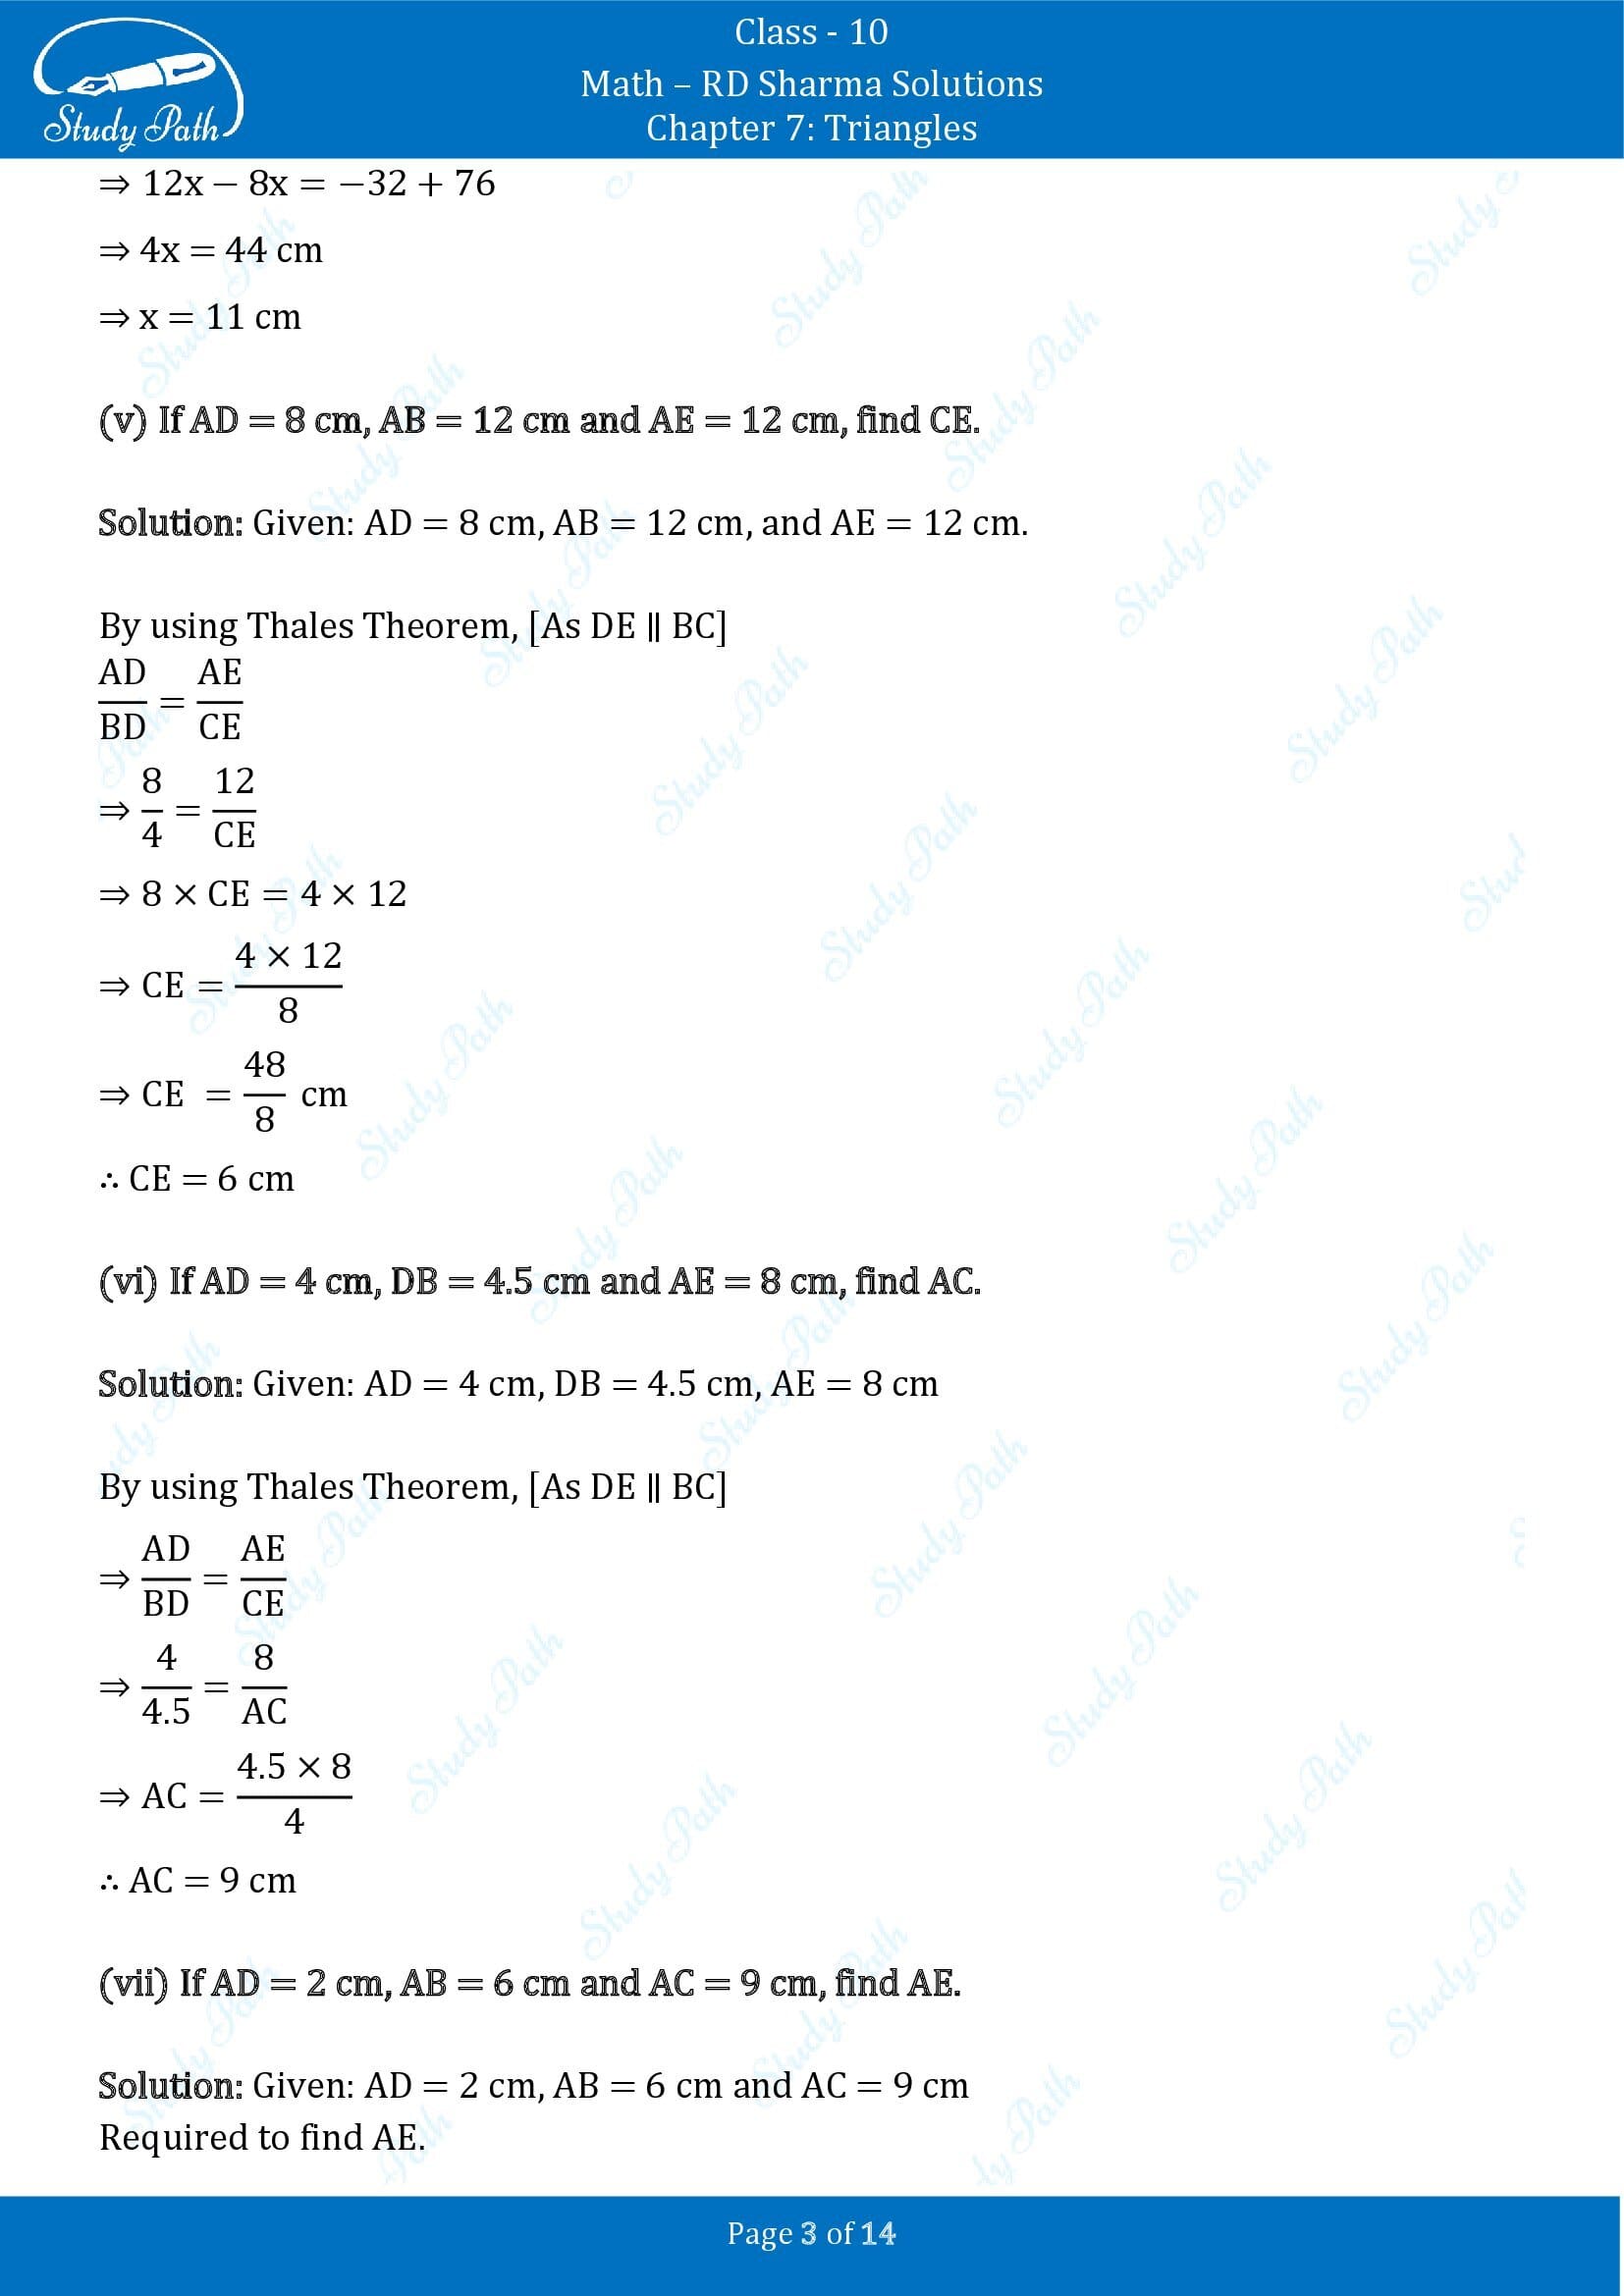 RD Sharma Solutions Class 10 Chapter 7 Triangles Exercise 7.2 00003